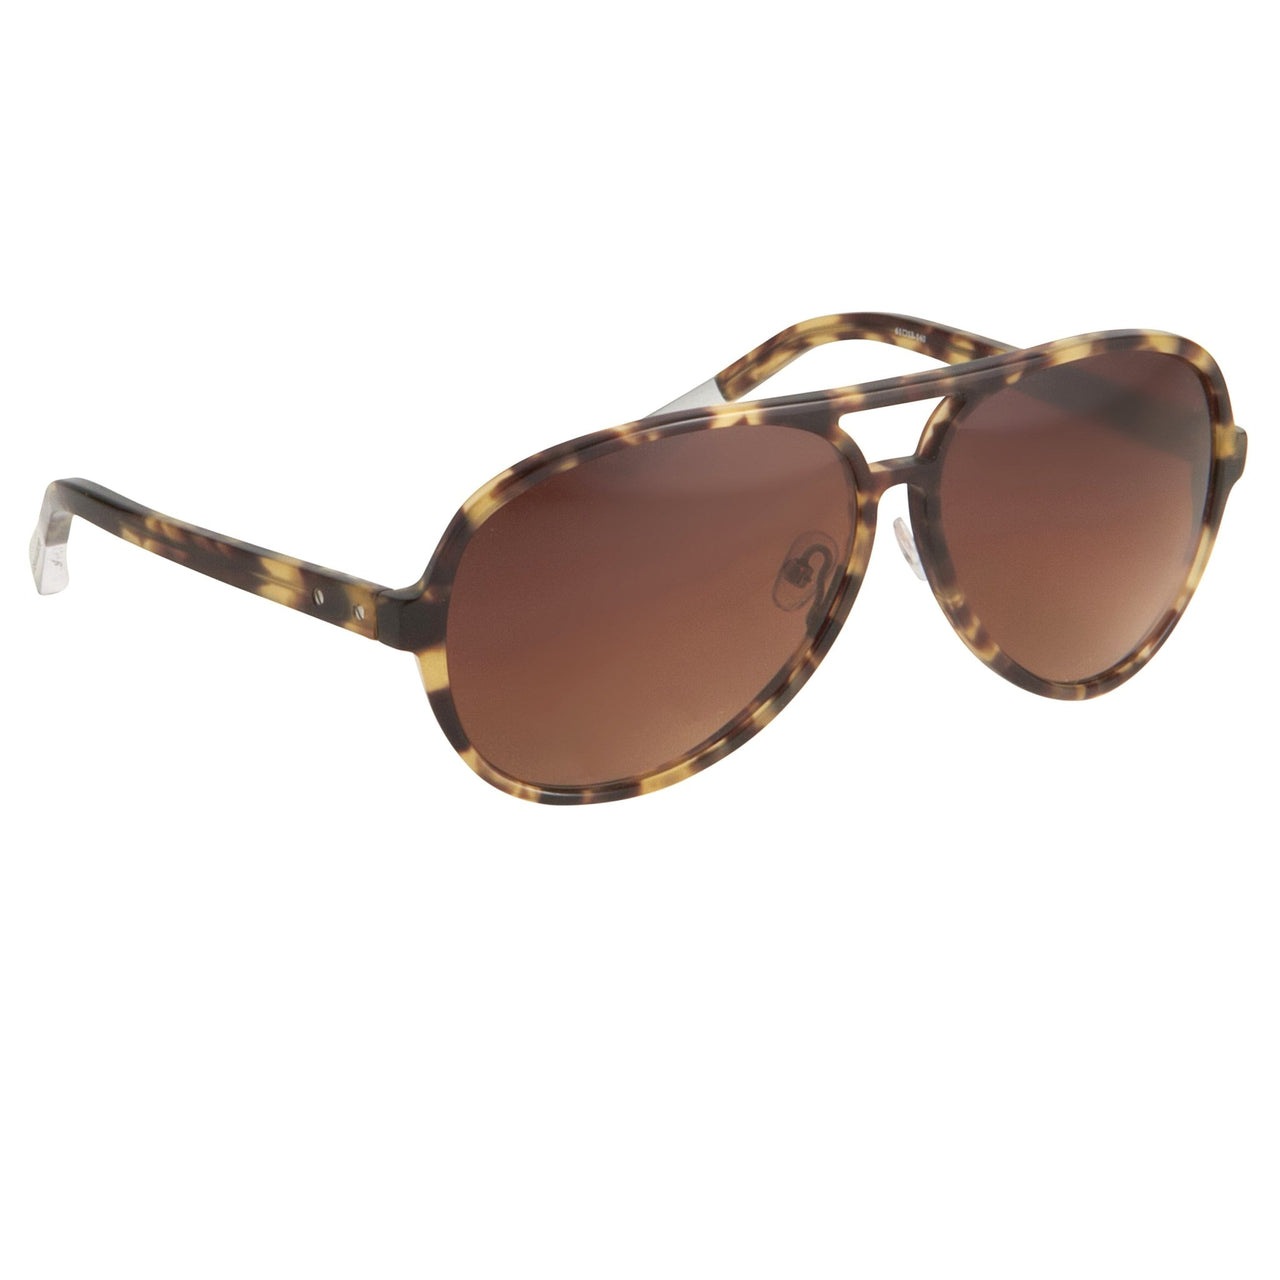 Kris Van Assche Unisex Sunglasses Brown Tortoise Shell with Grey Graduated Lenses Category 2 - KVA21C1SUN - Watches & Crystals